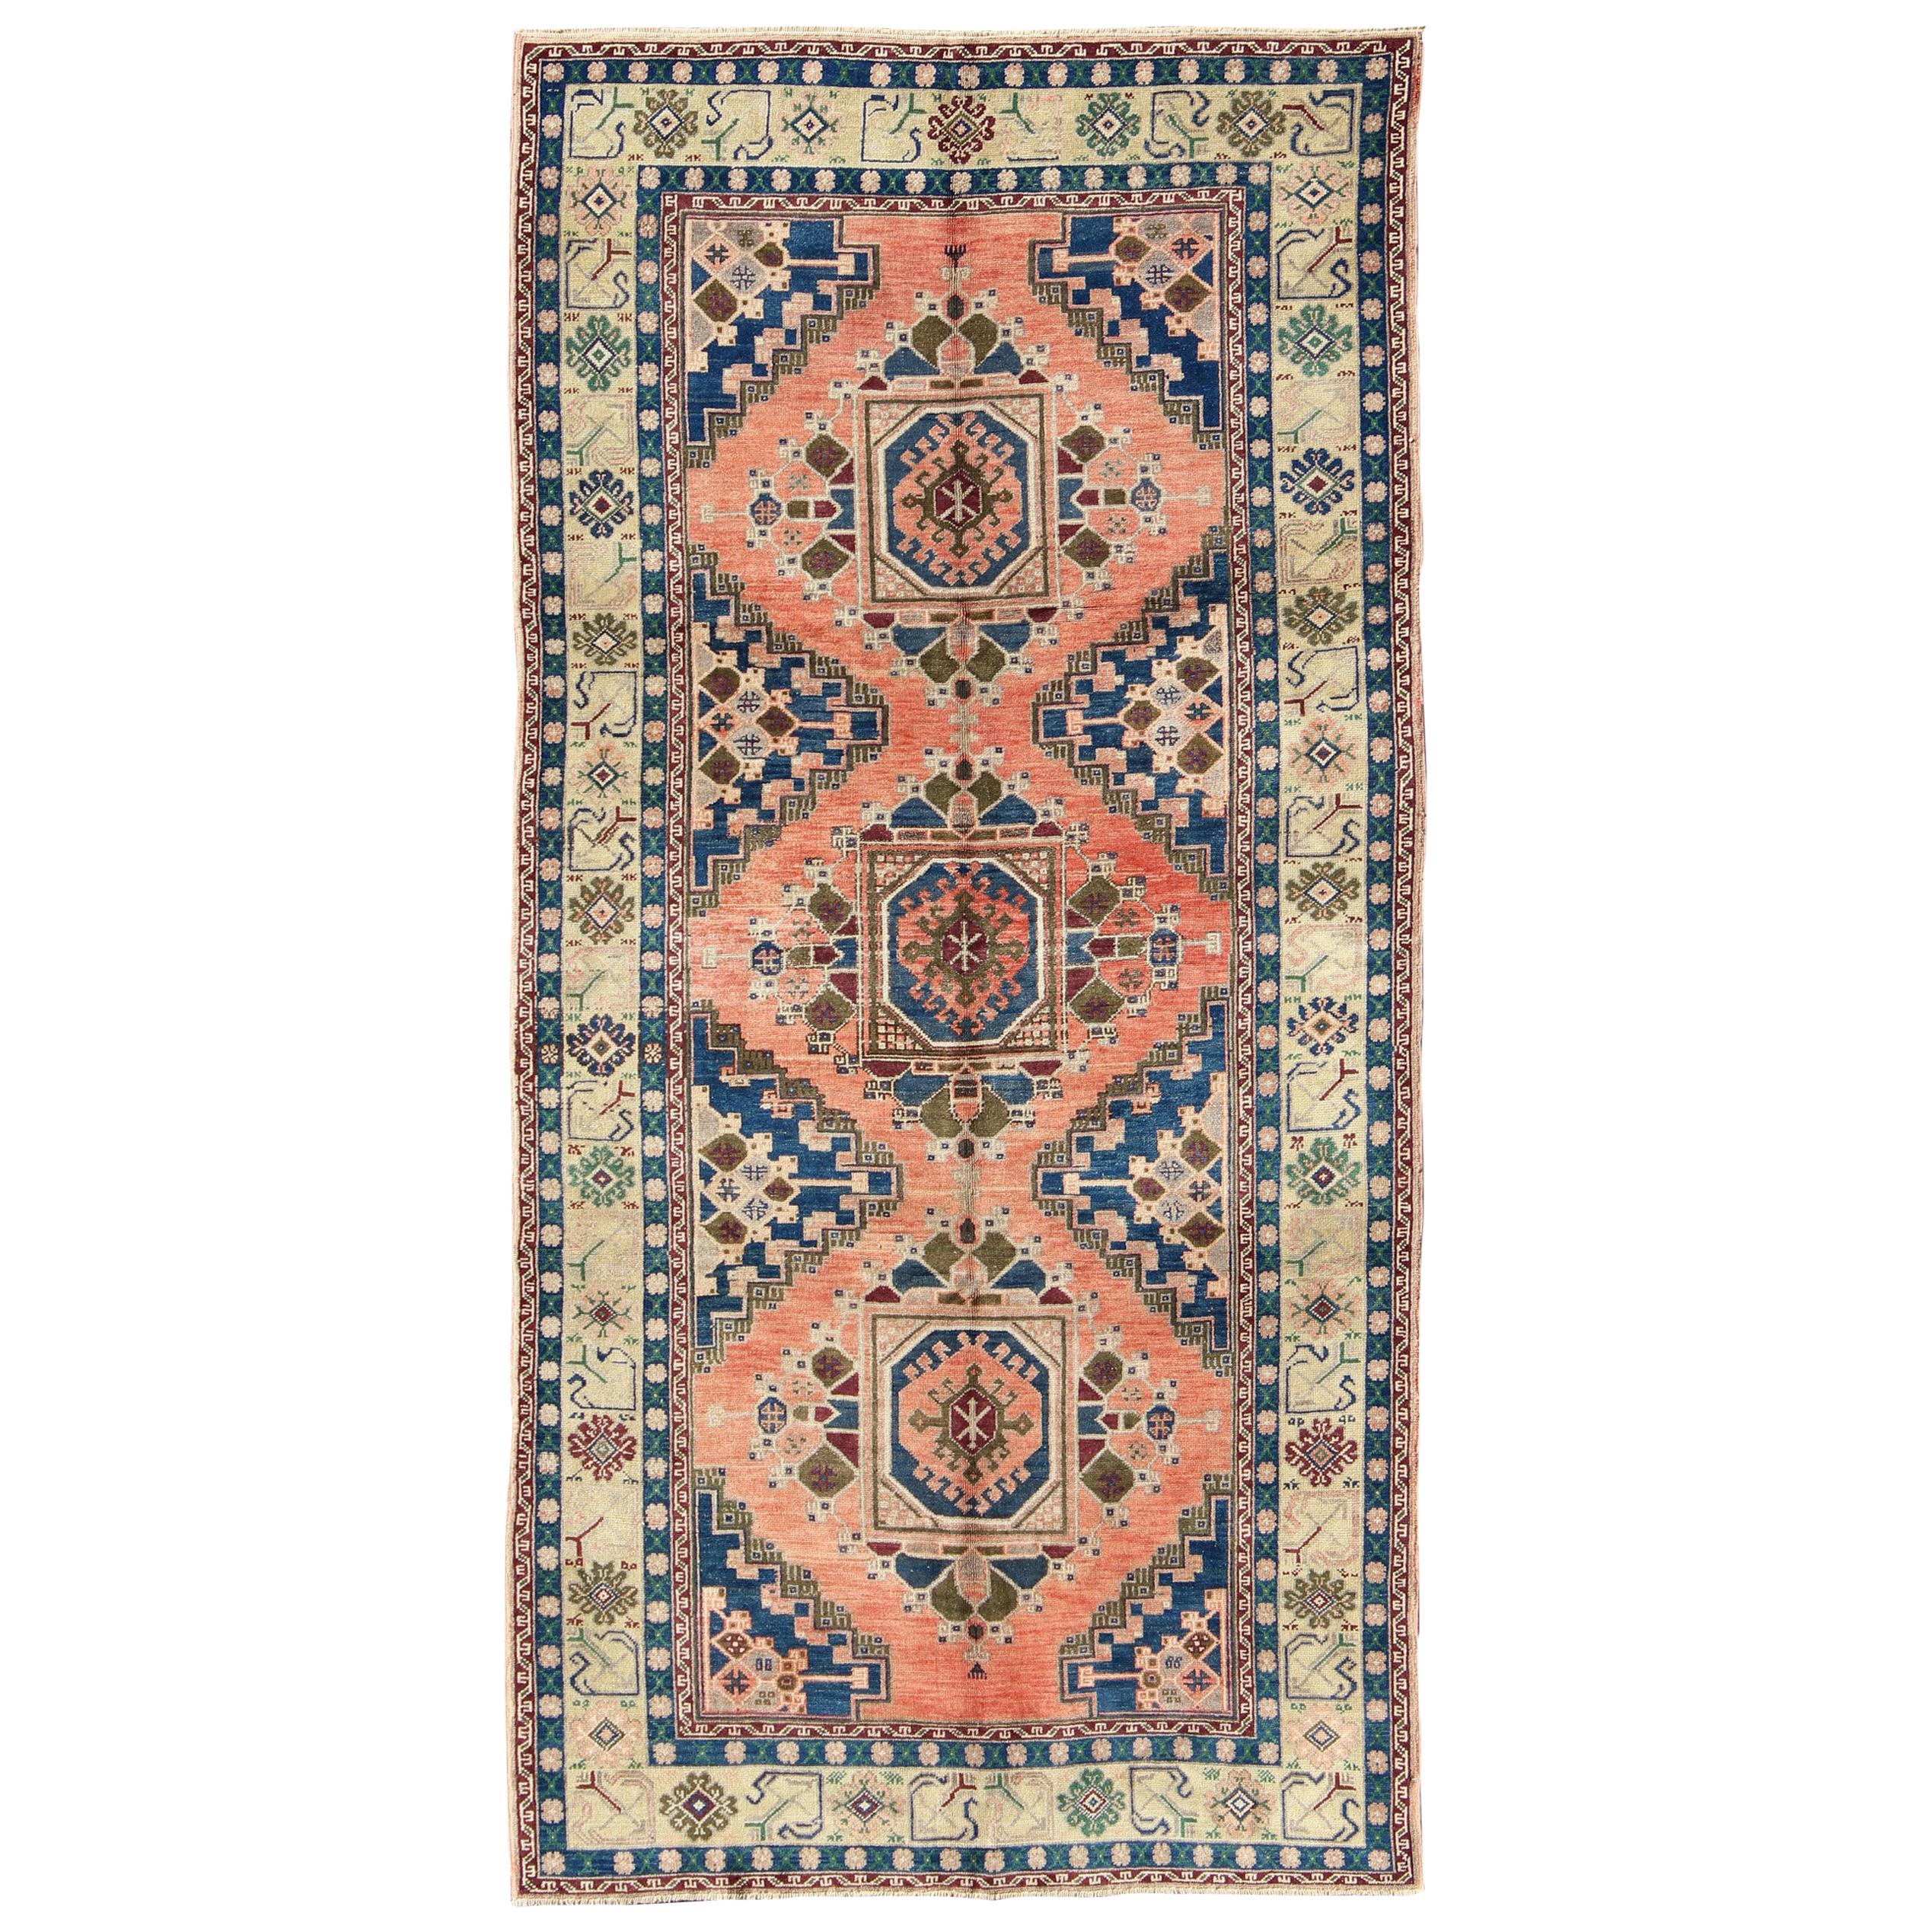 Vintage Oushak Rug from Turkey with Medallions in Salmon Pink and Blue